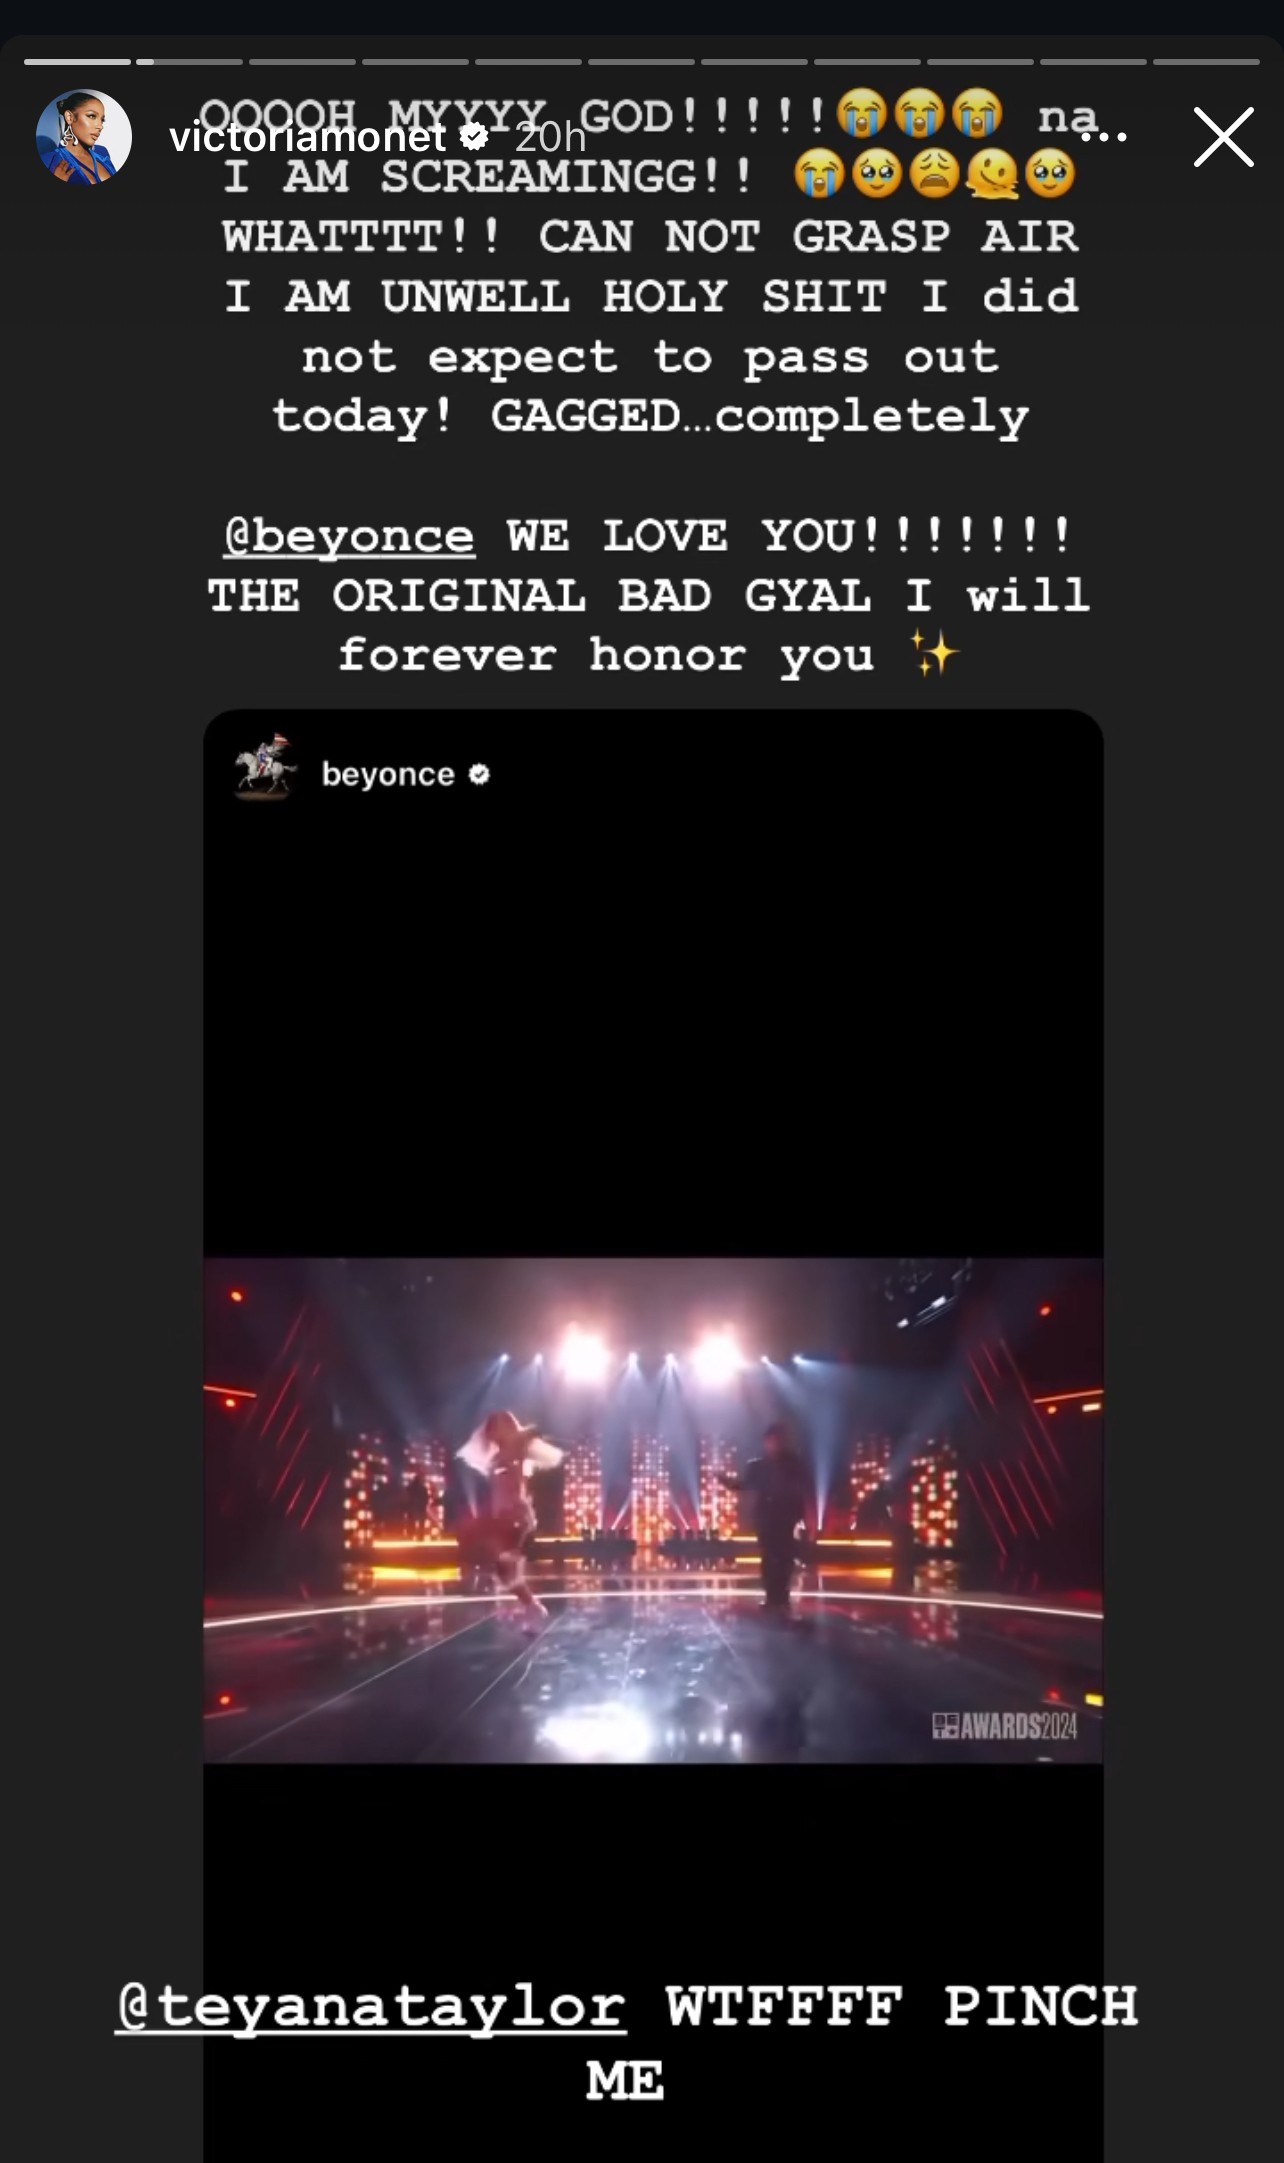 Victoria Monét is excited about a shoutout from Beyoncé. A screenshot of Beyoncé performing at the Grammy Awards 2024 is included. Teyana Taylor is mentioned